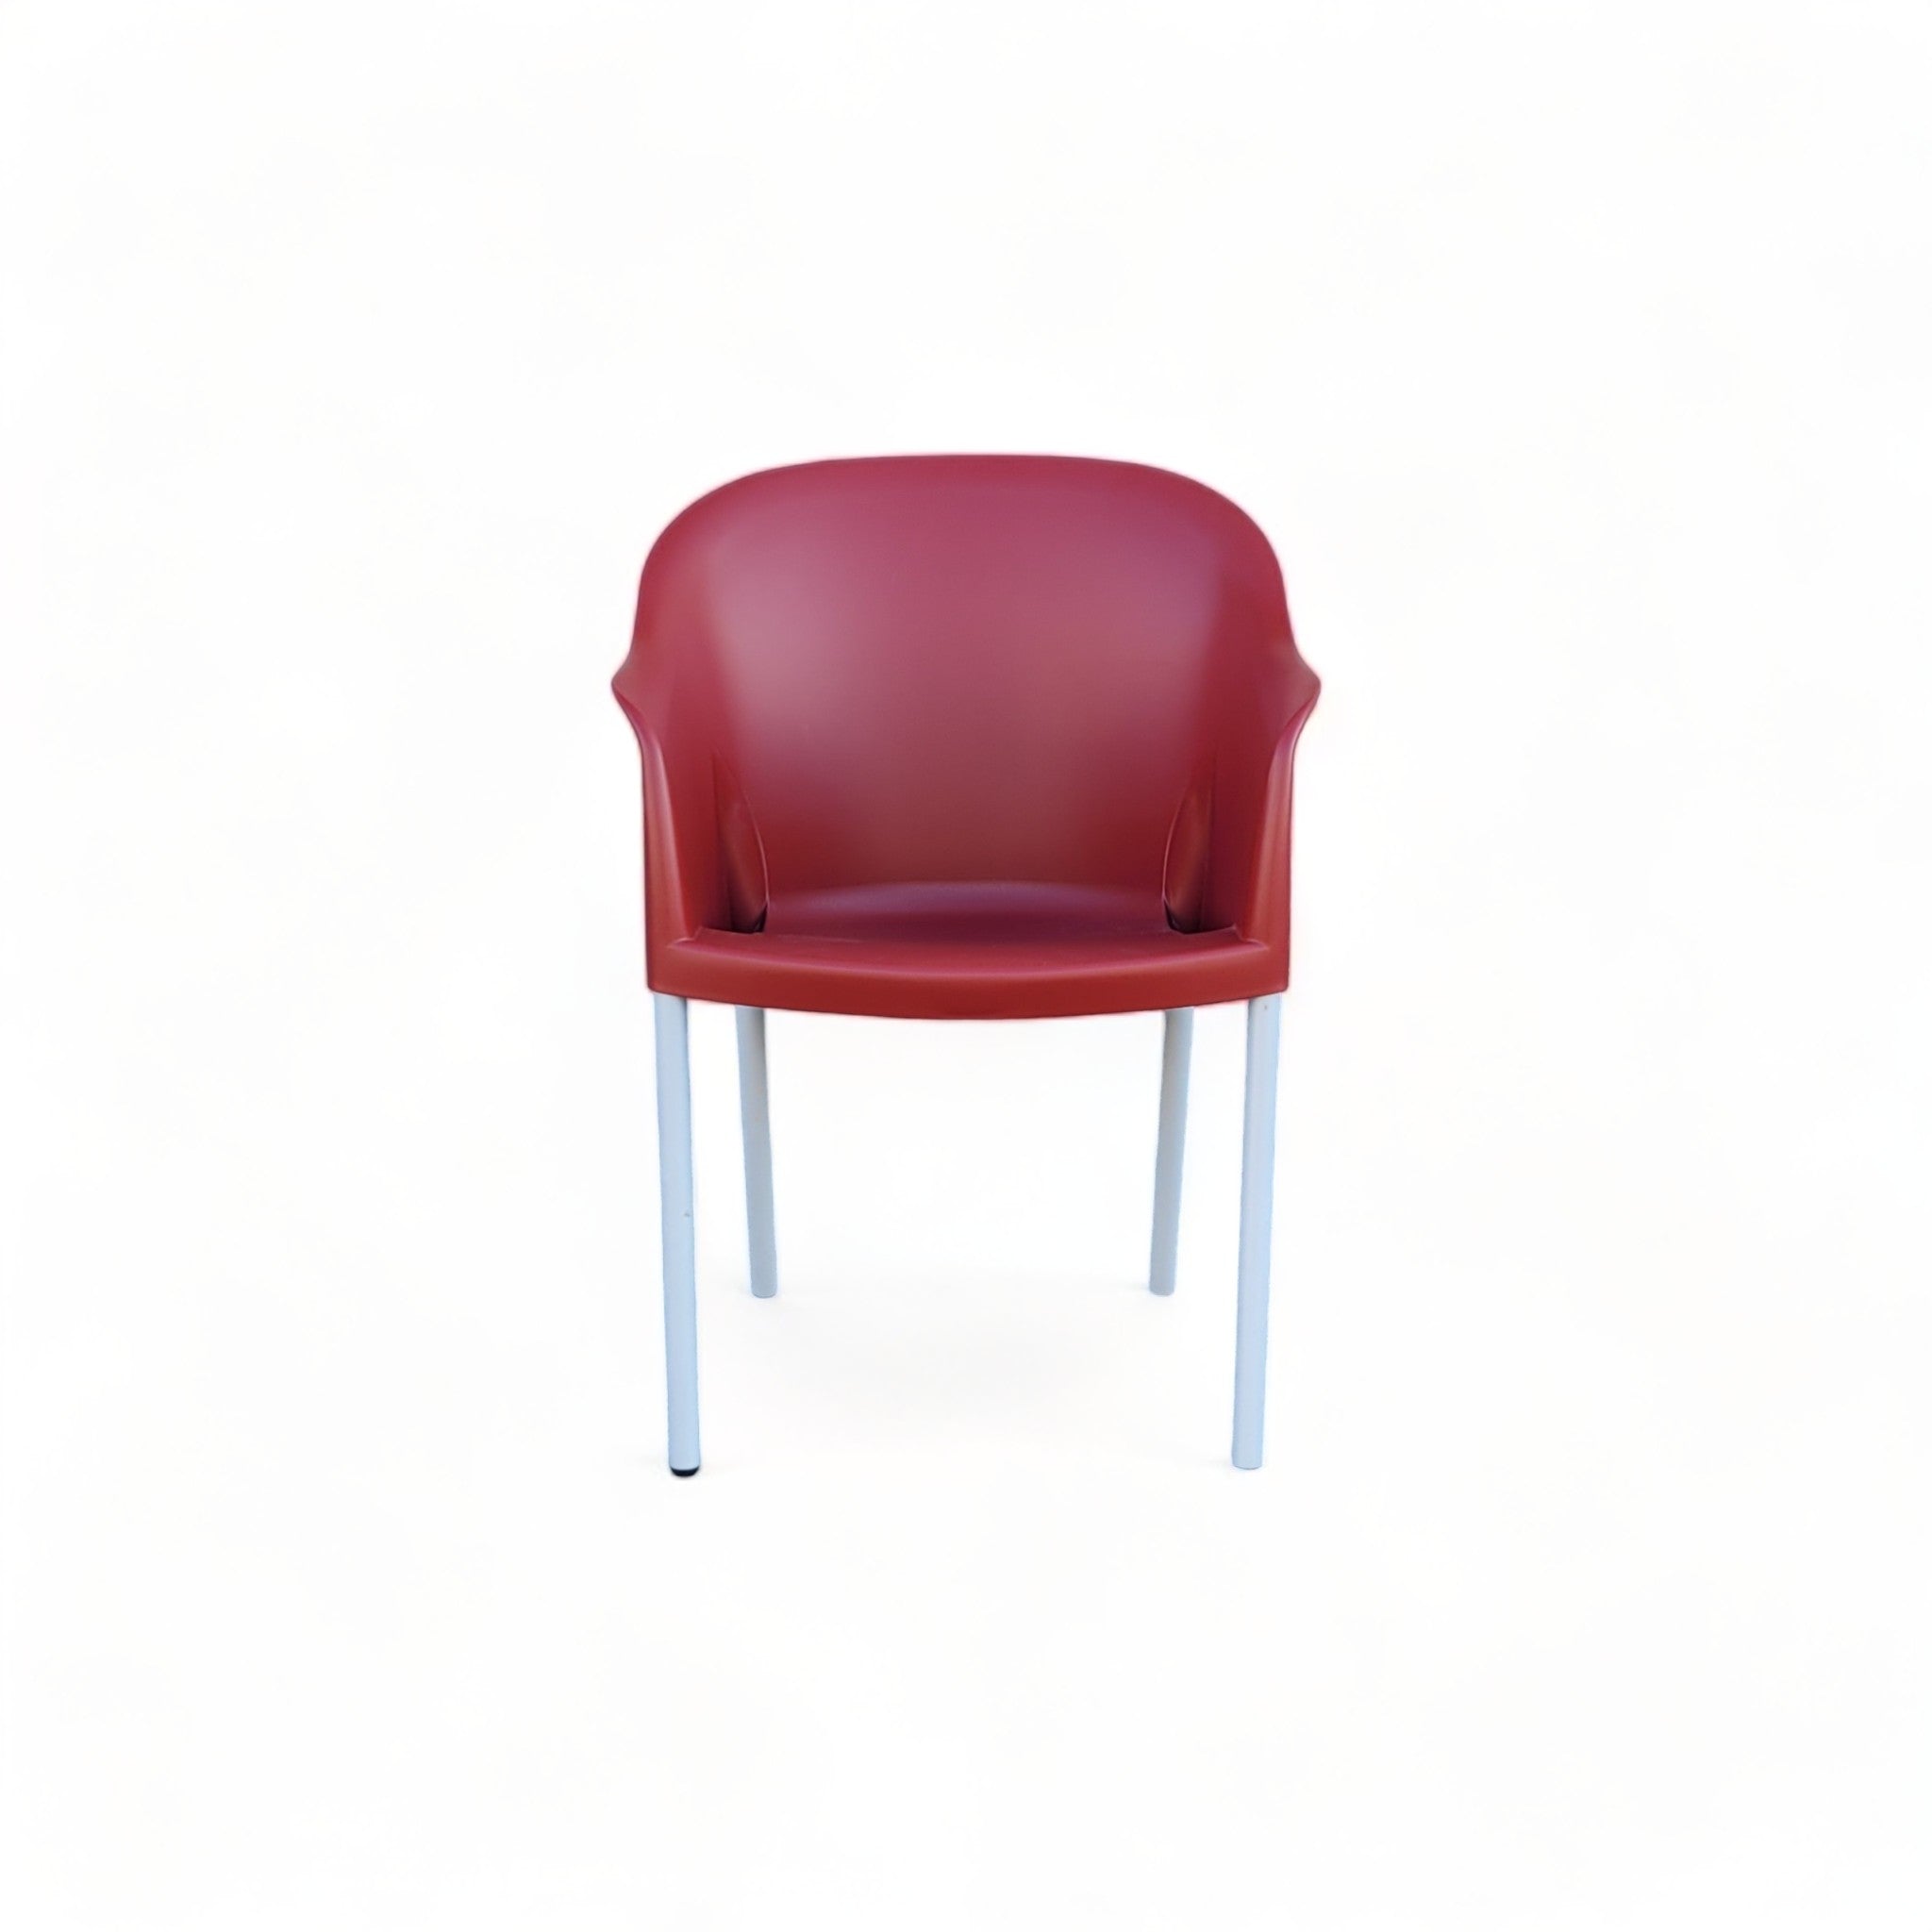 Plastium Dining Chair (sold as set of 4)